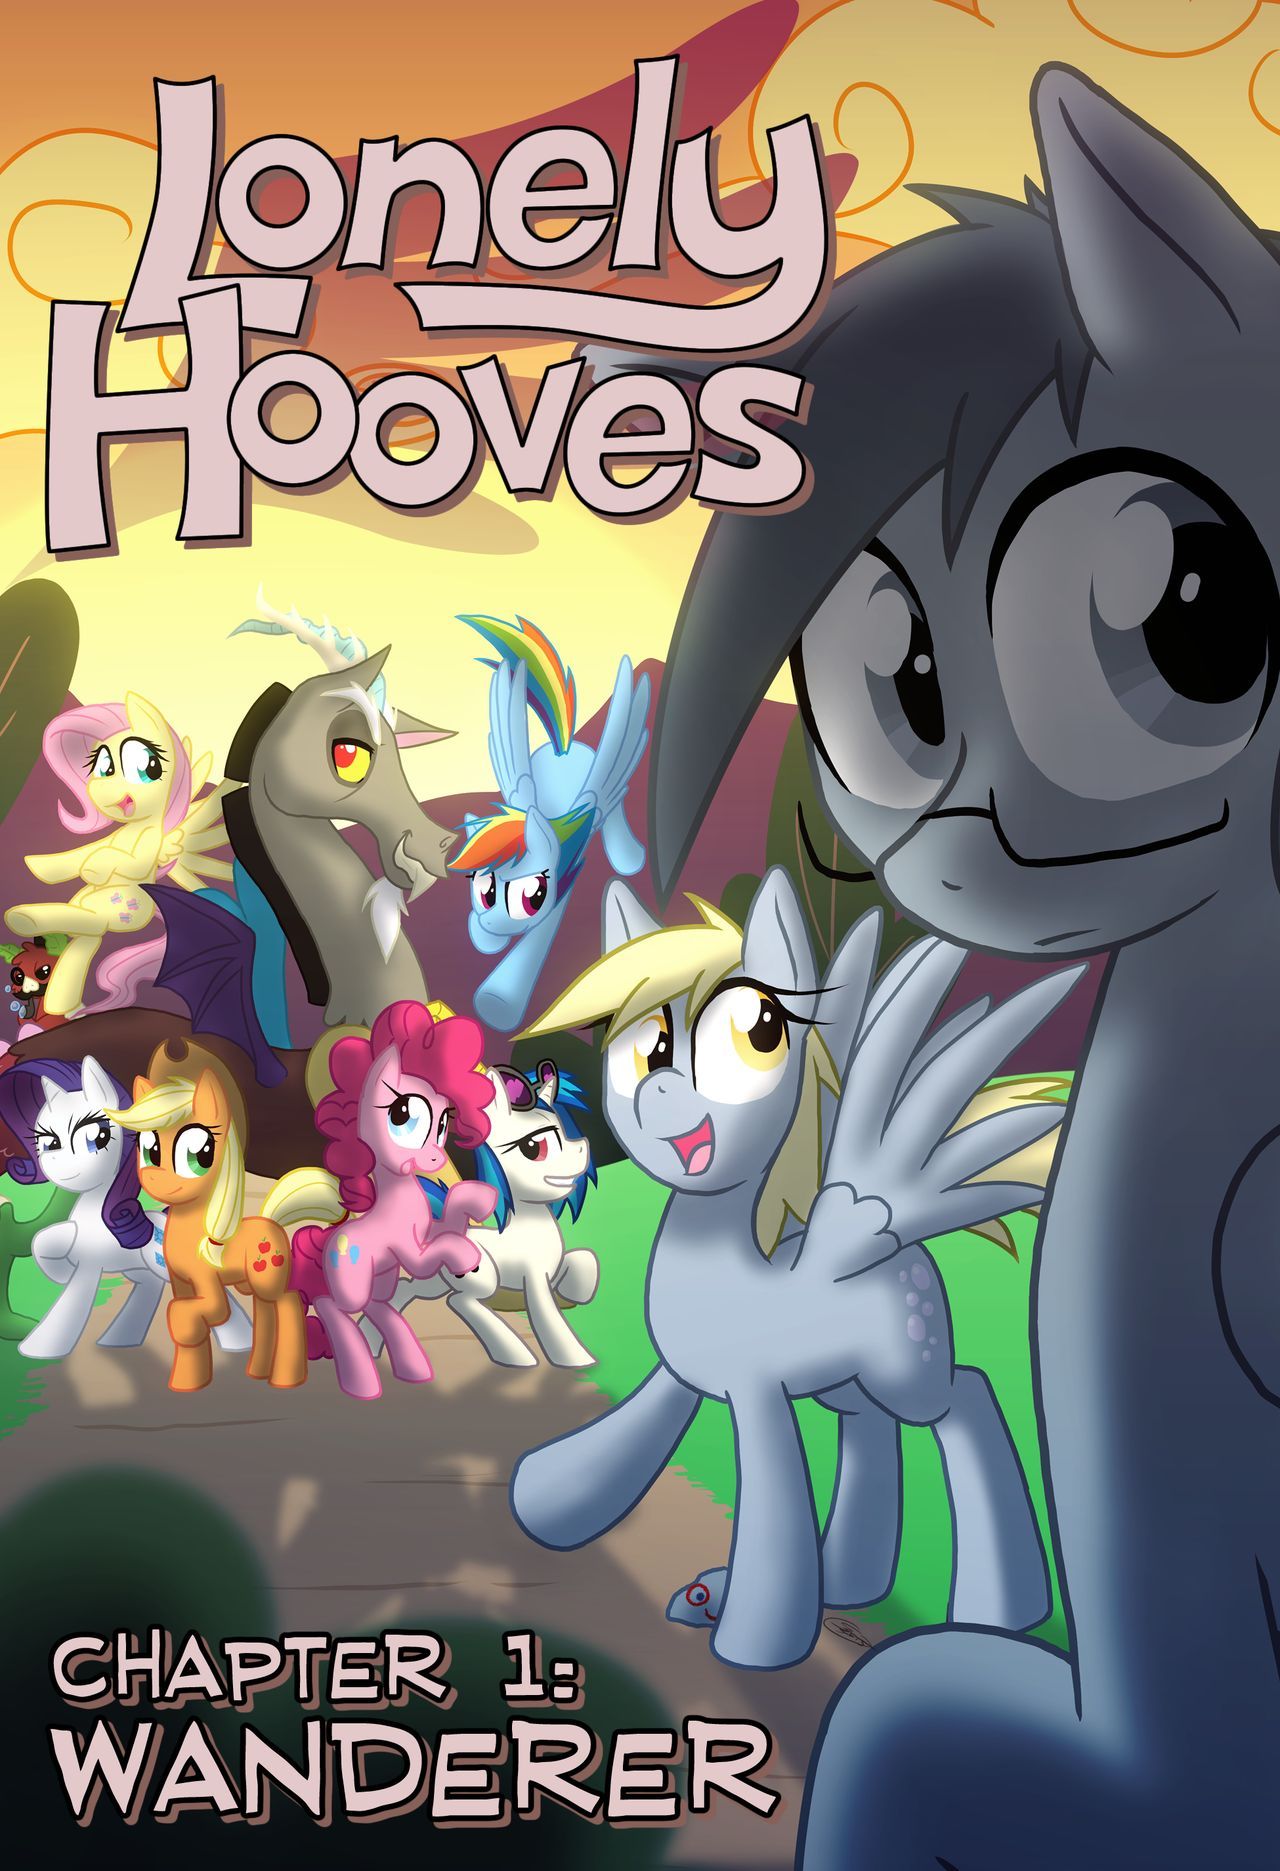 [Zaron] Lonely Hooves (My Little Pony Friendship Is Magic) [Ongoing] 1